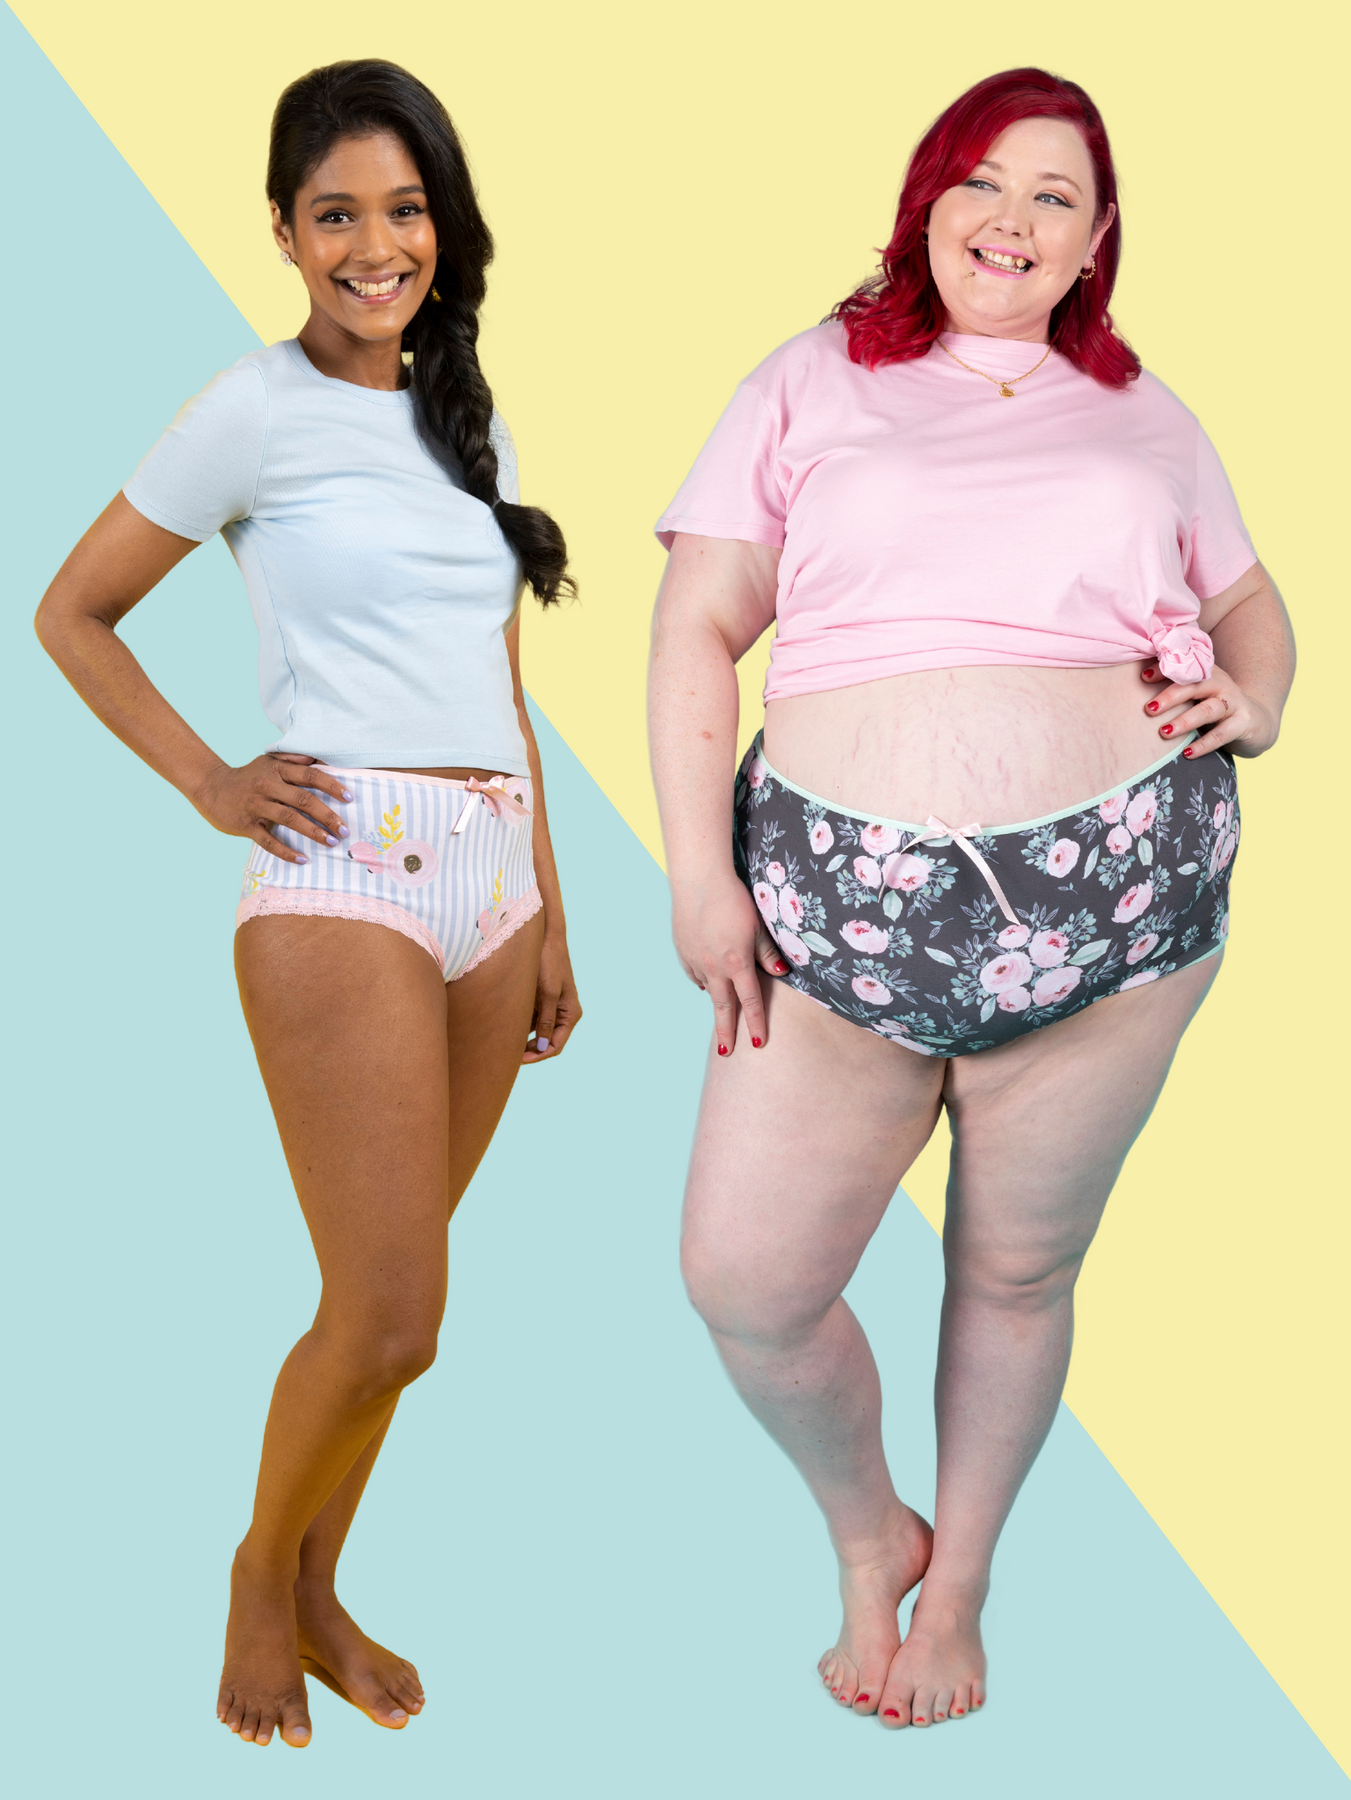 Make underwear sewing pattern for your clothing line by